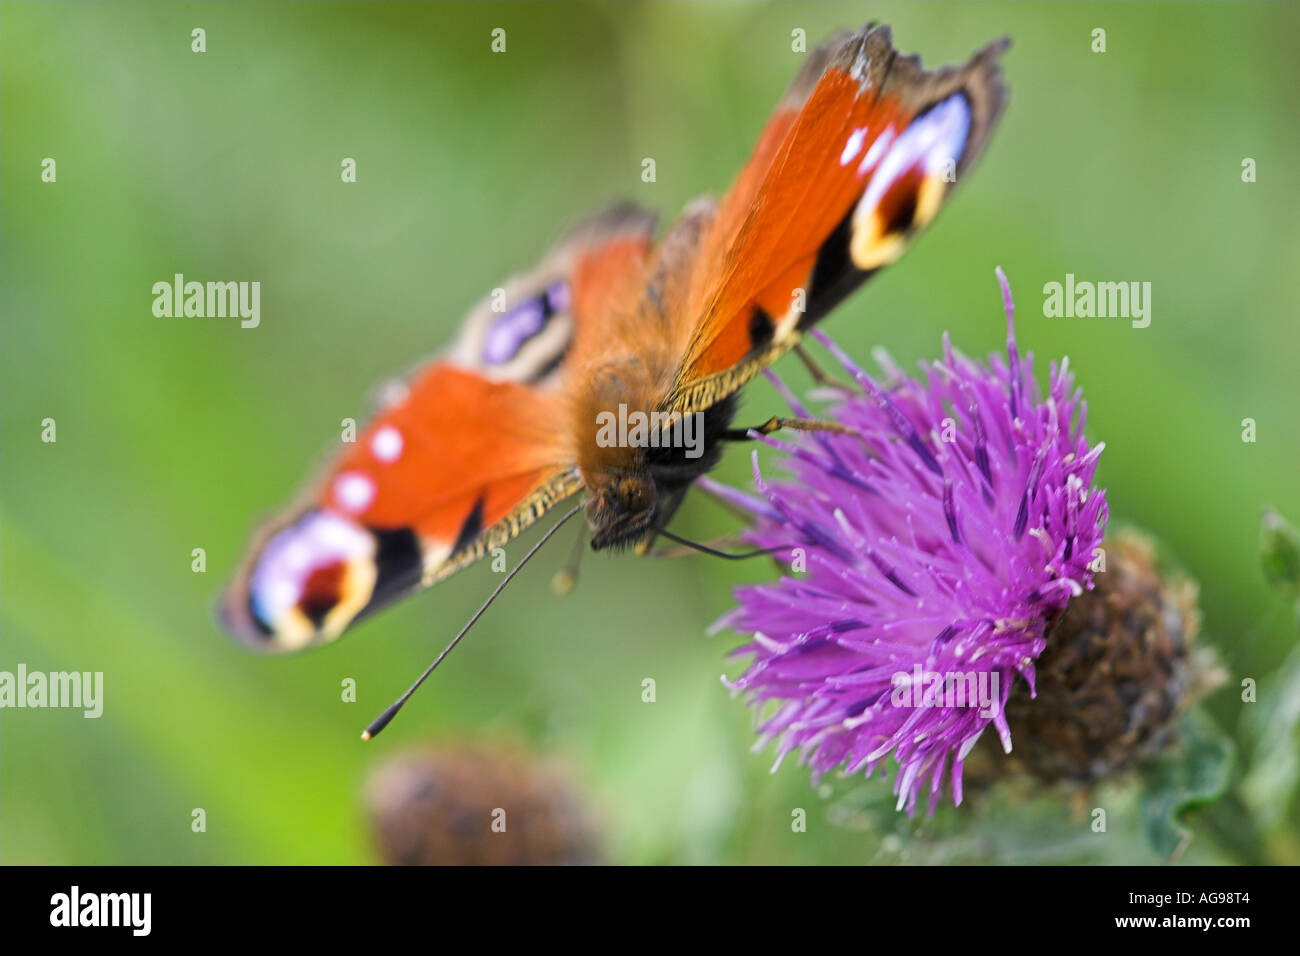 European peacock butterfly on flower Banque D'Images